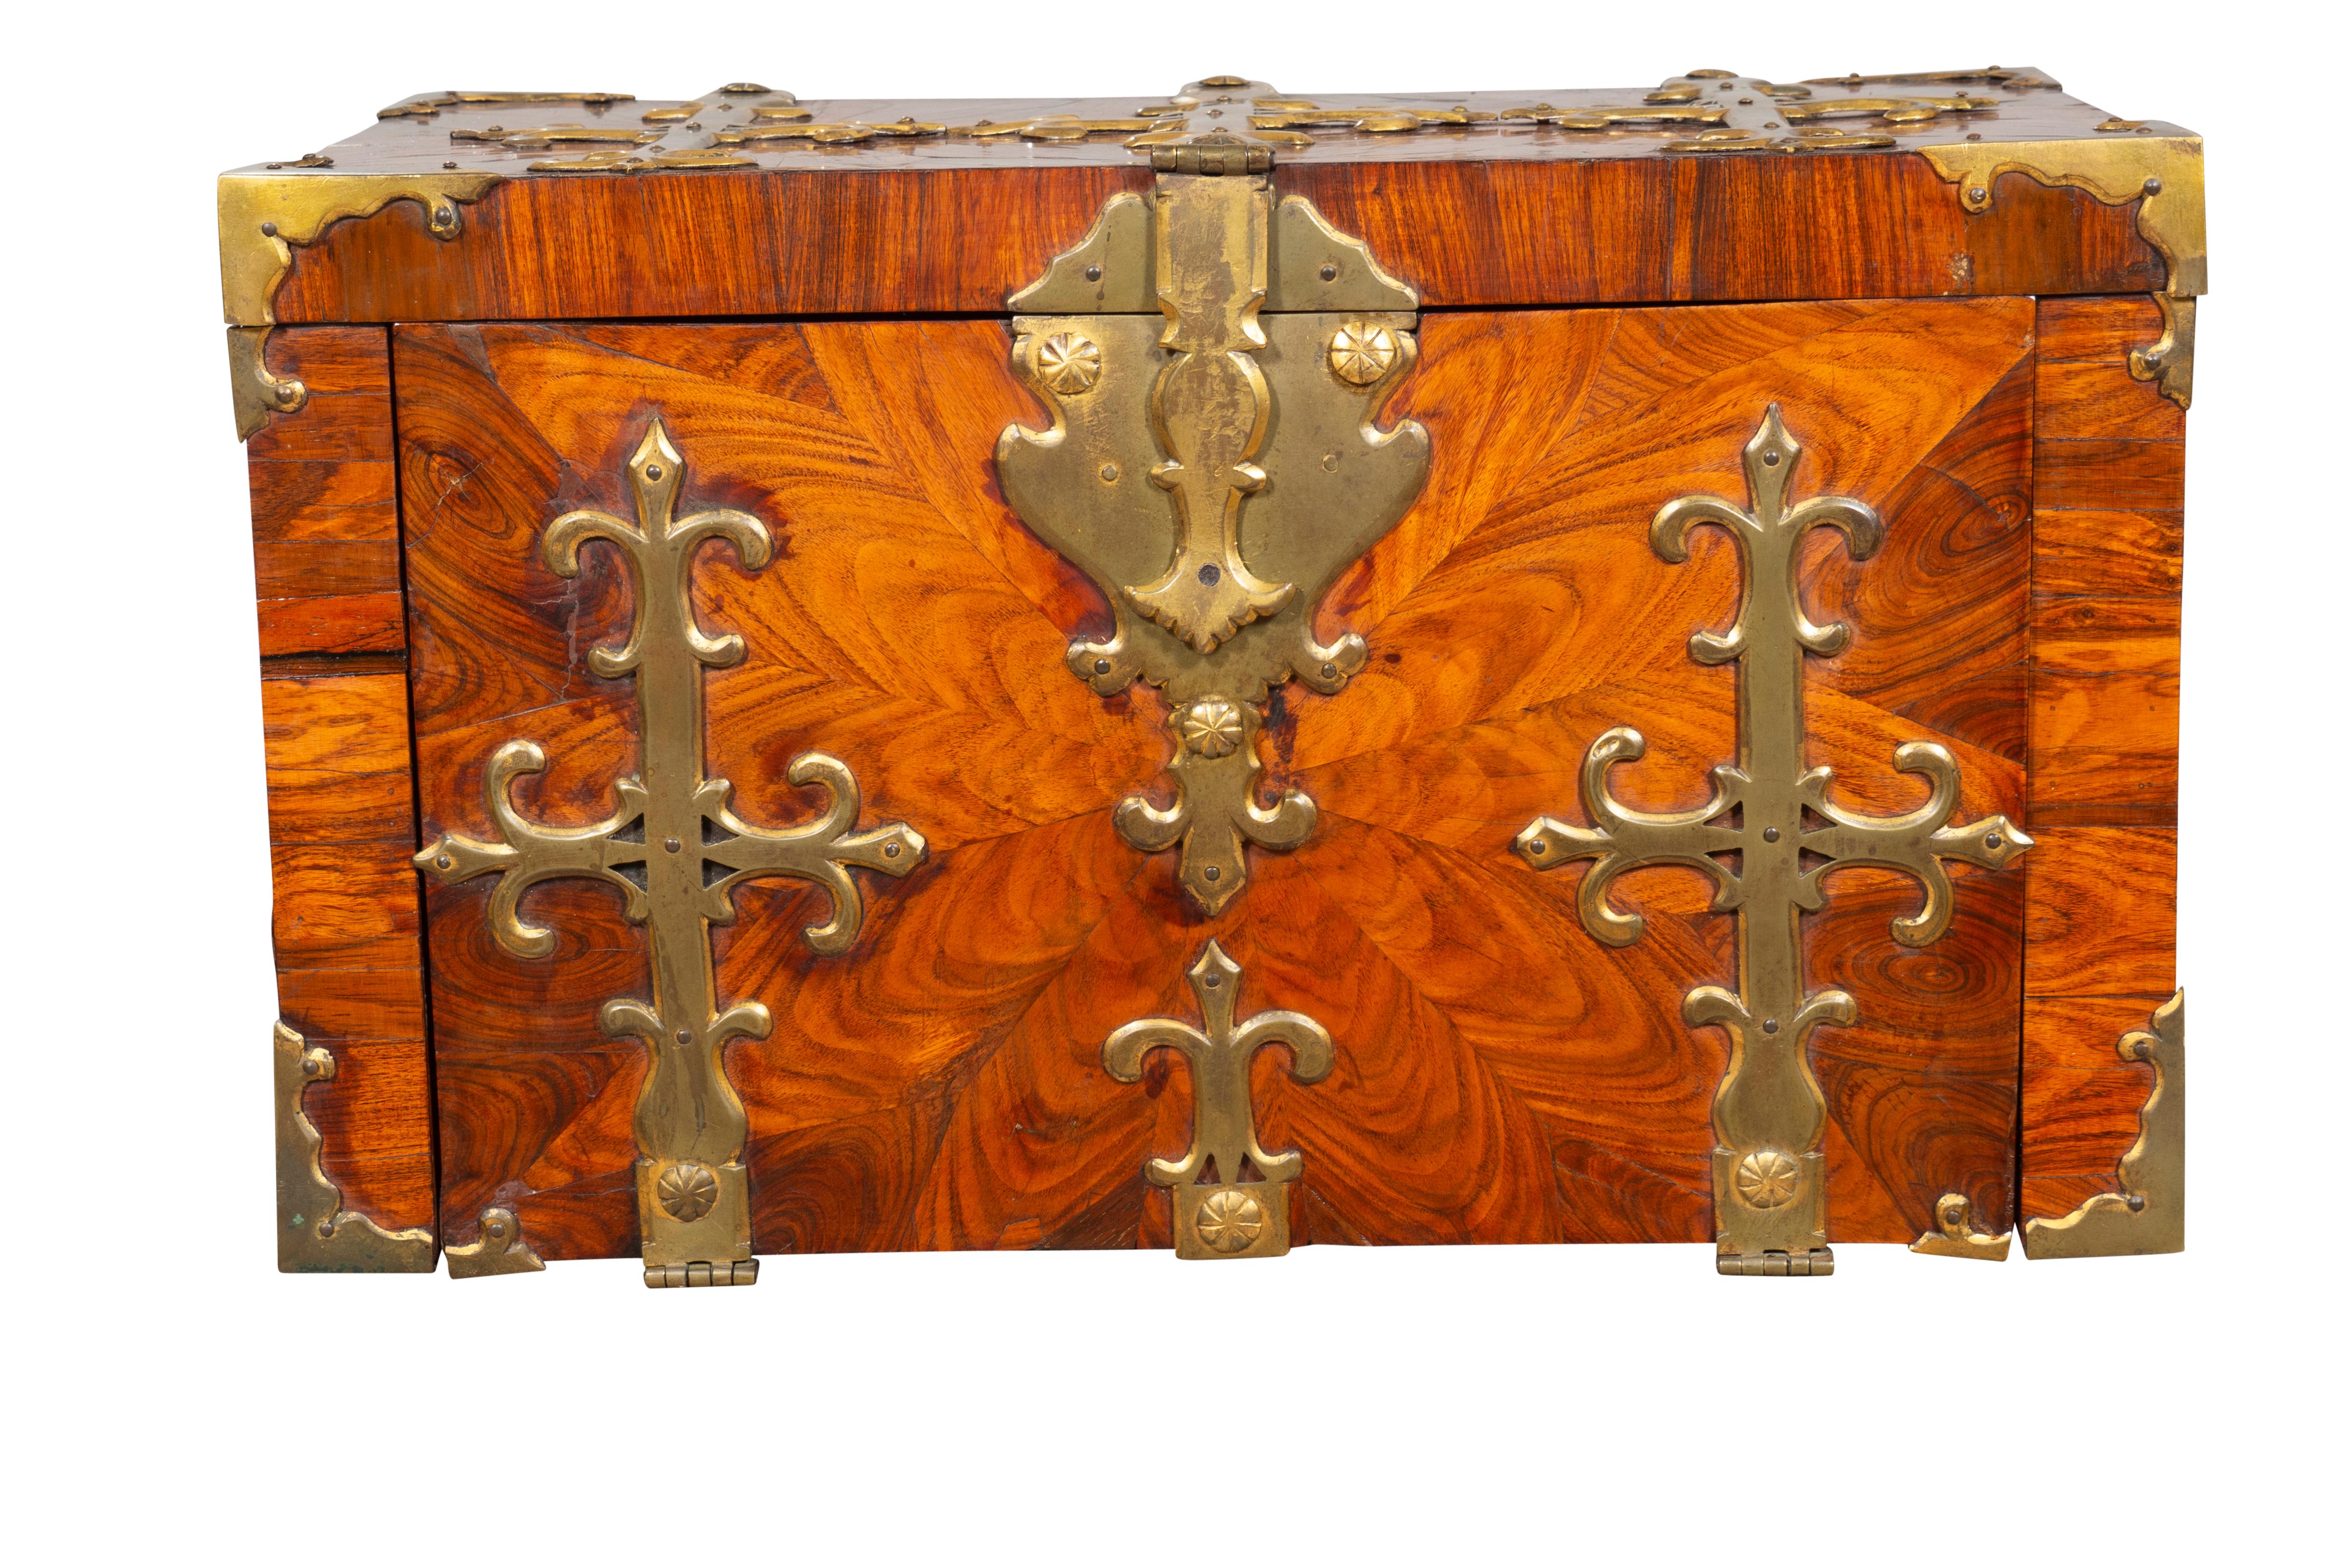 With rectangular hinged top with brass strap mounting. When open the front folds down to expose hidden compartments and wells. Case mounted the same as the lid. Side carry handles. Interesting larger size. These boxes were used to secure valuables.